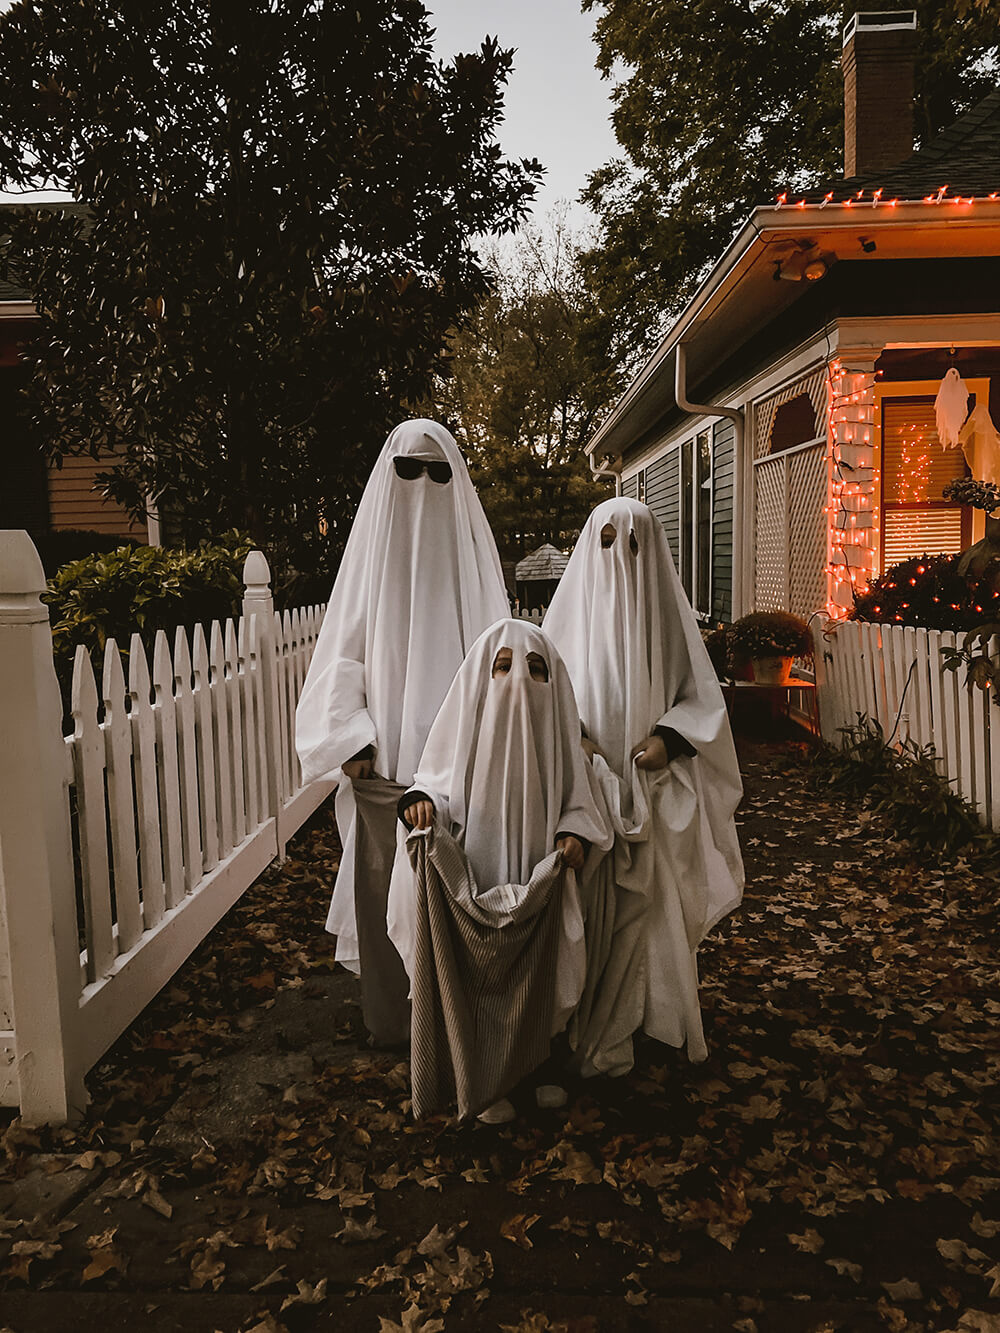 This year, our family began The Switch Witch: A New Family Halloween Tradition! With Blair's Type 1 diagnoses we knew that we would need to adjust our approach from previous years. And this was such a wonderful one that everyone loved. I'm sharing all about our approach over on KaraLayne.com!